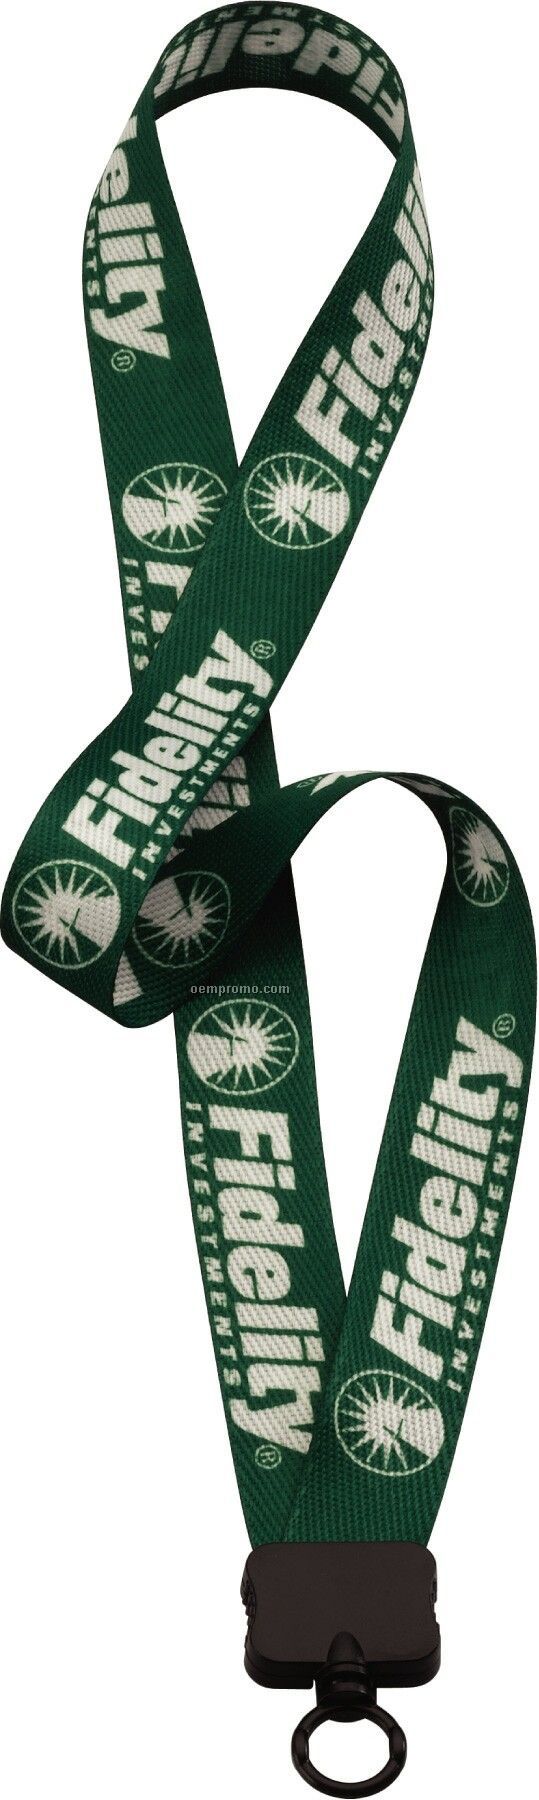 1" Waffle Weave Dye Sublimated Lanyard With Plastic Clamshell & O-ring